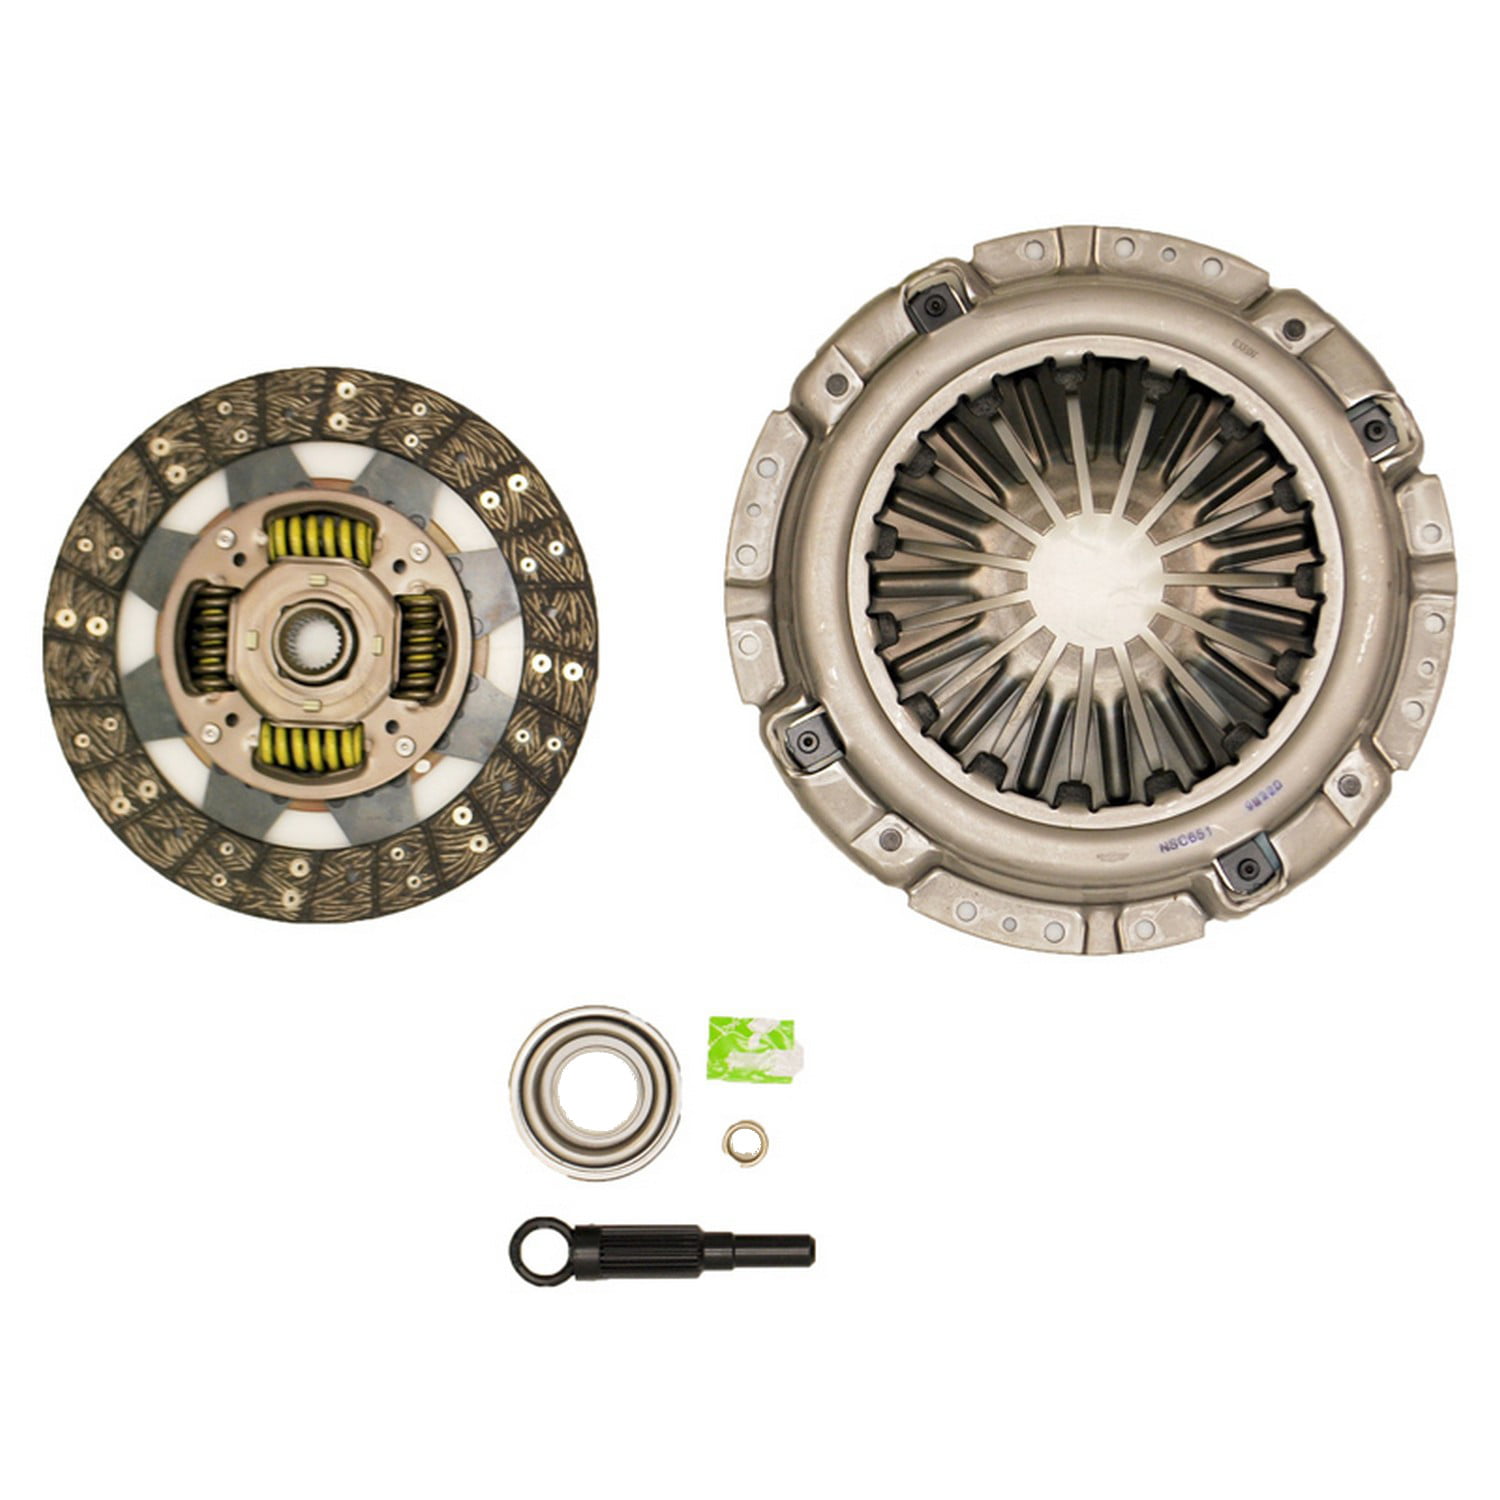 Valeo 52405402 OE Replacement Clutch Kit 